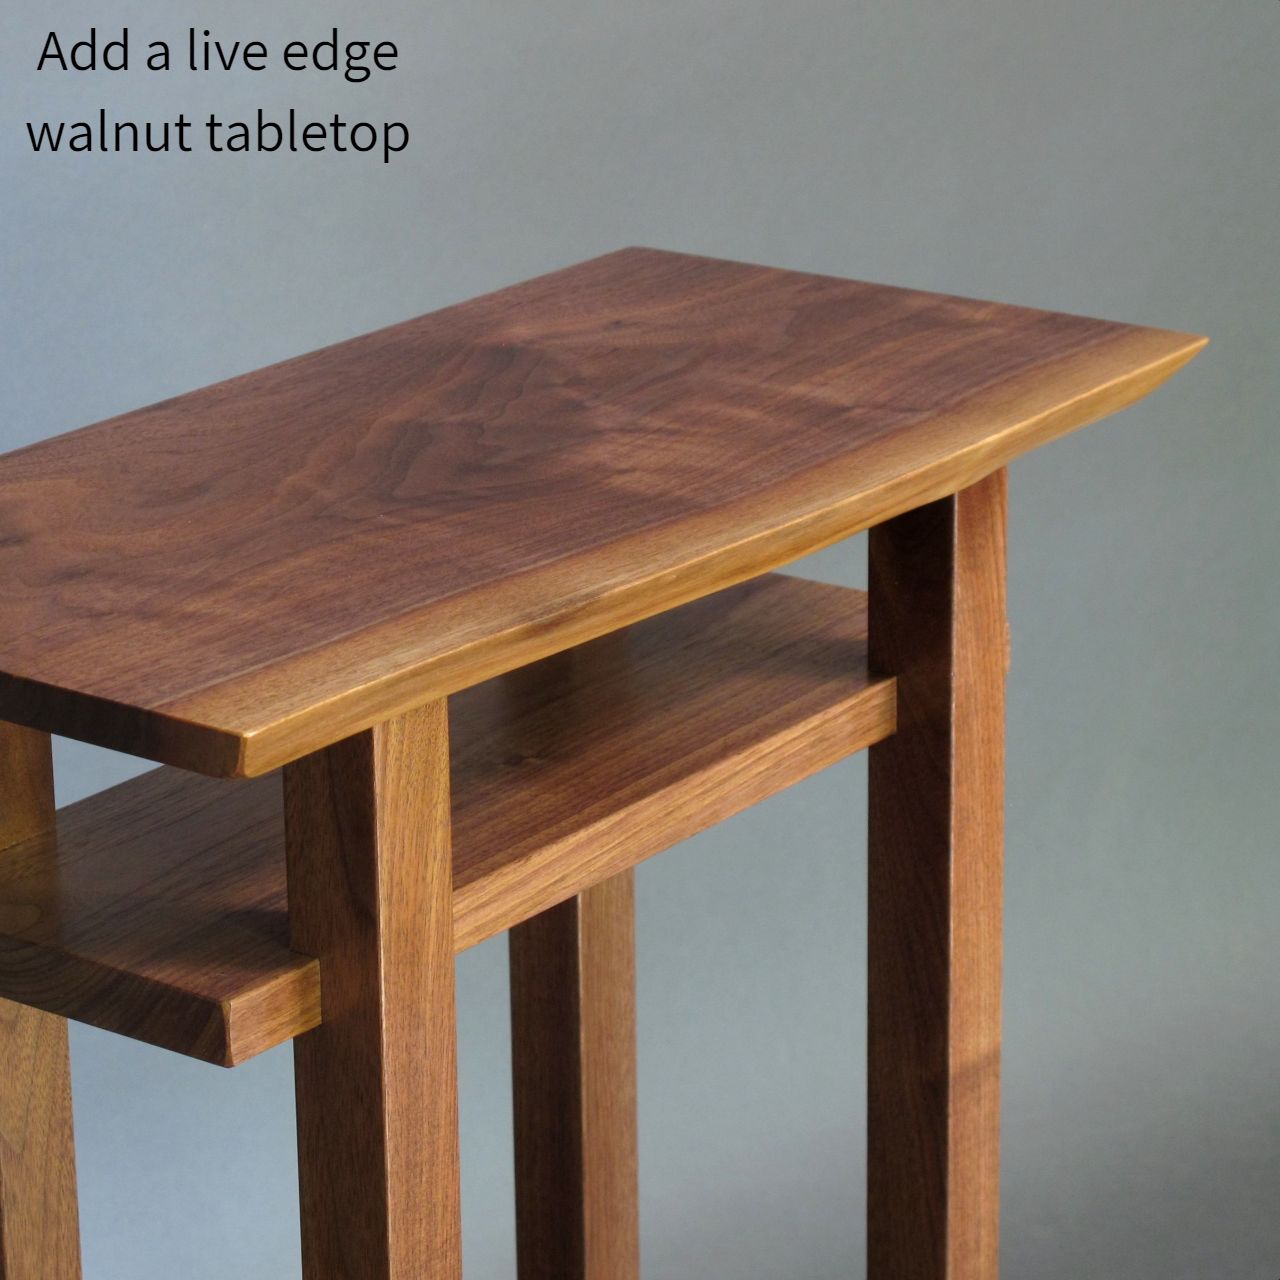 You can add a live edge table top to our walnut entry table by Mokuzai Furniture.